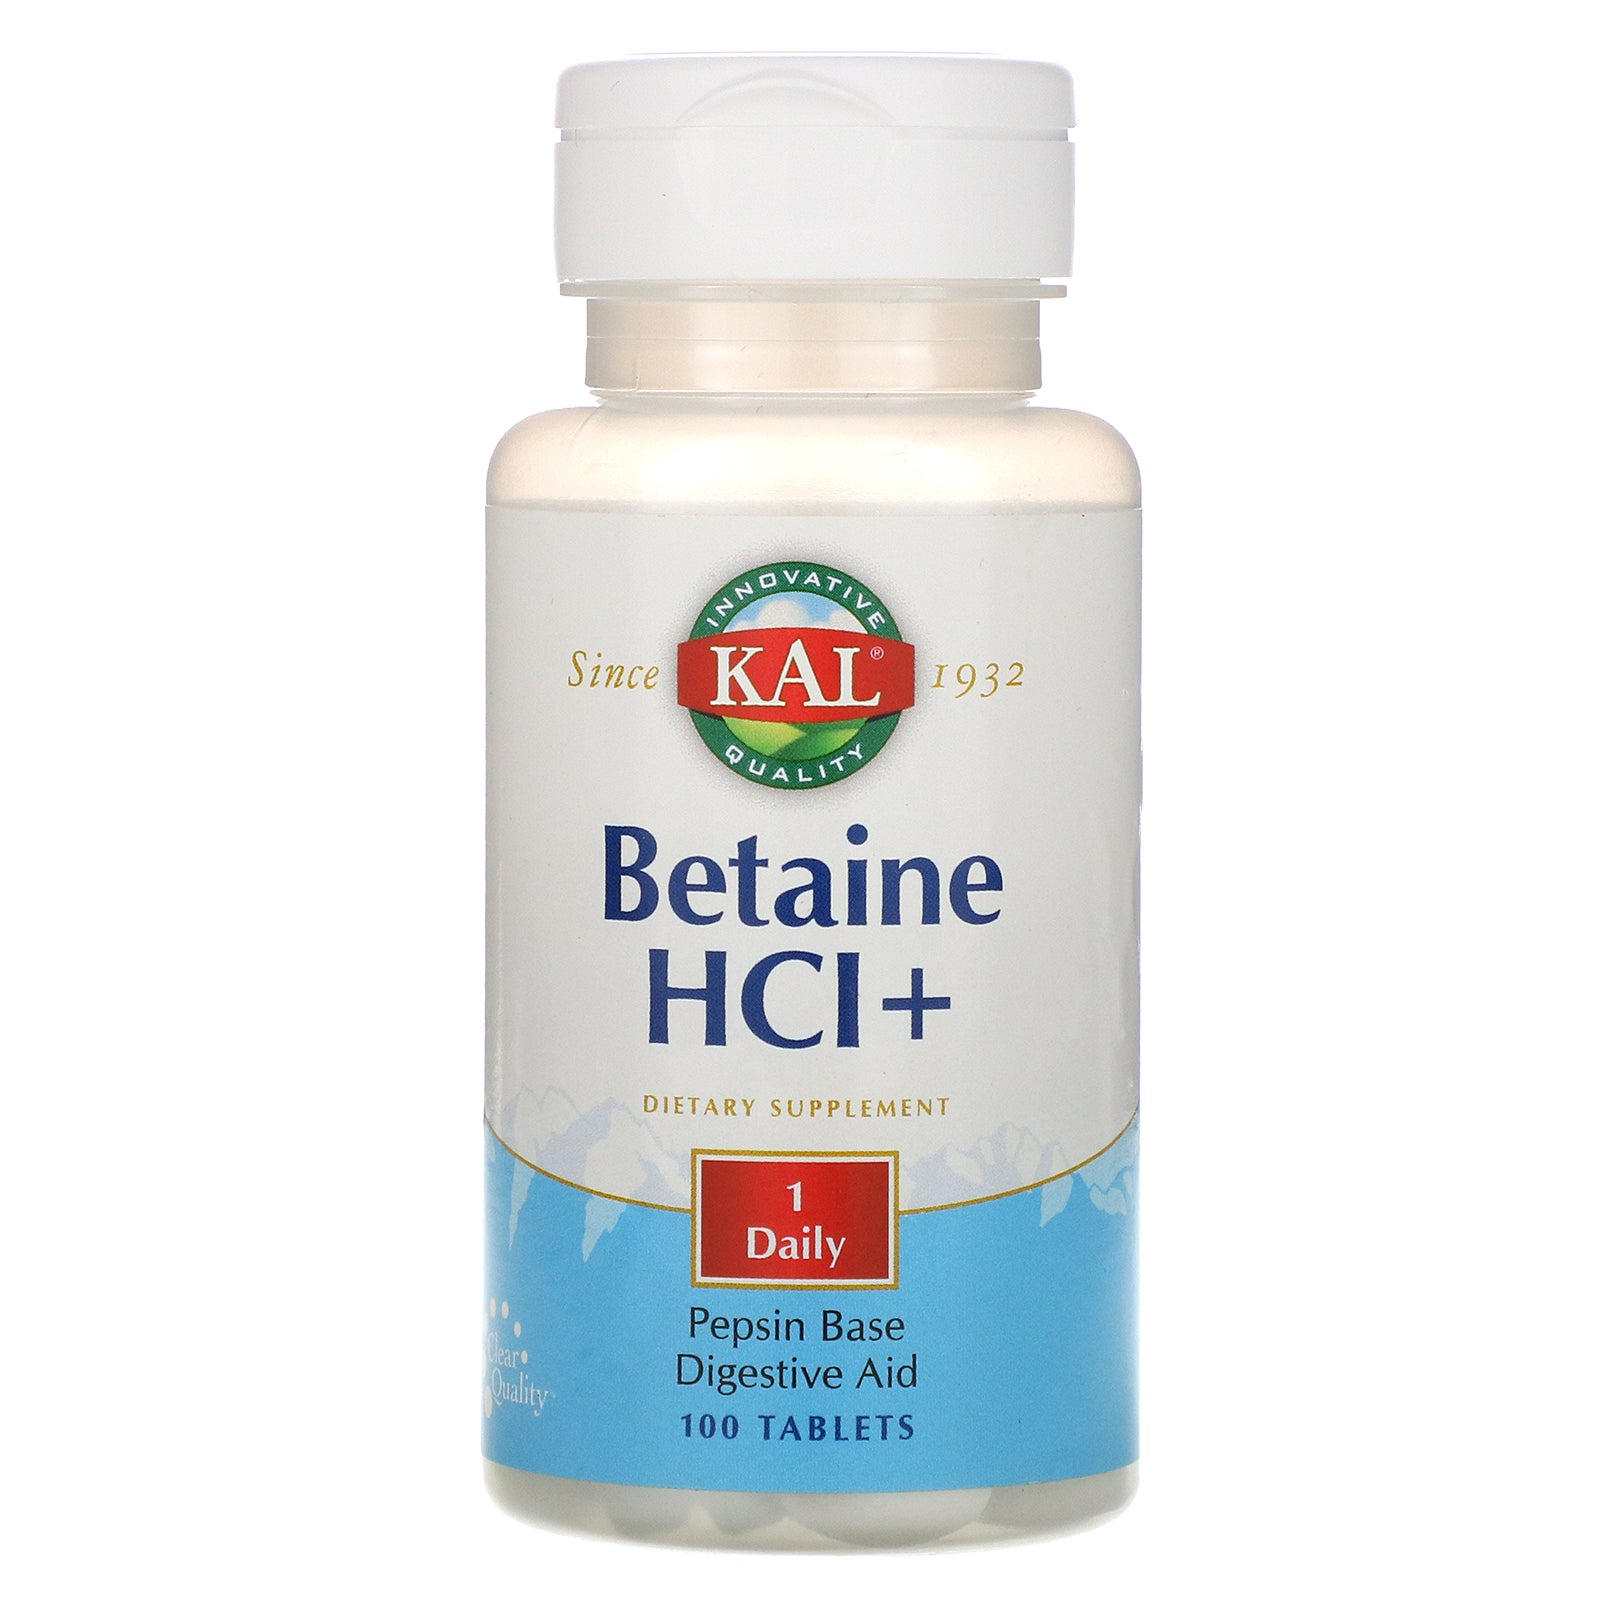 KAL, Betaine HCl+ Tablets